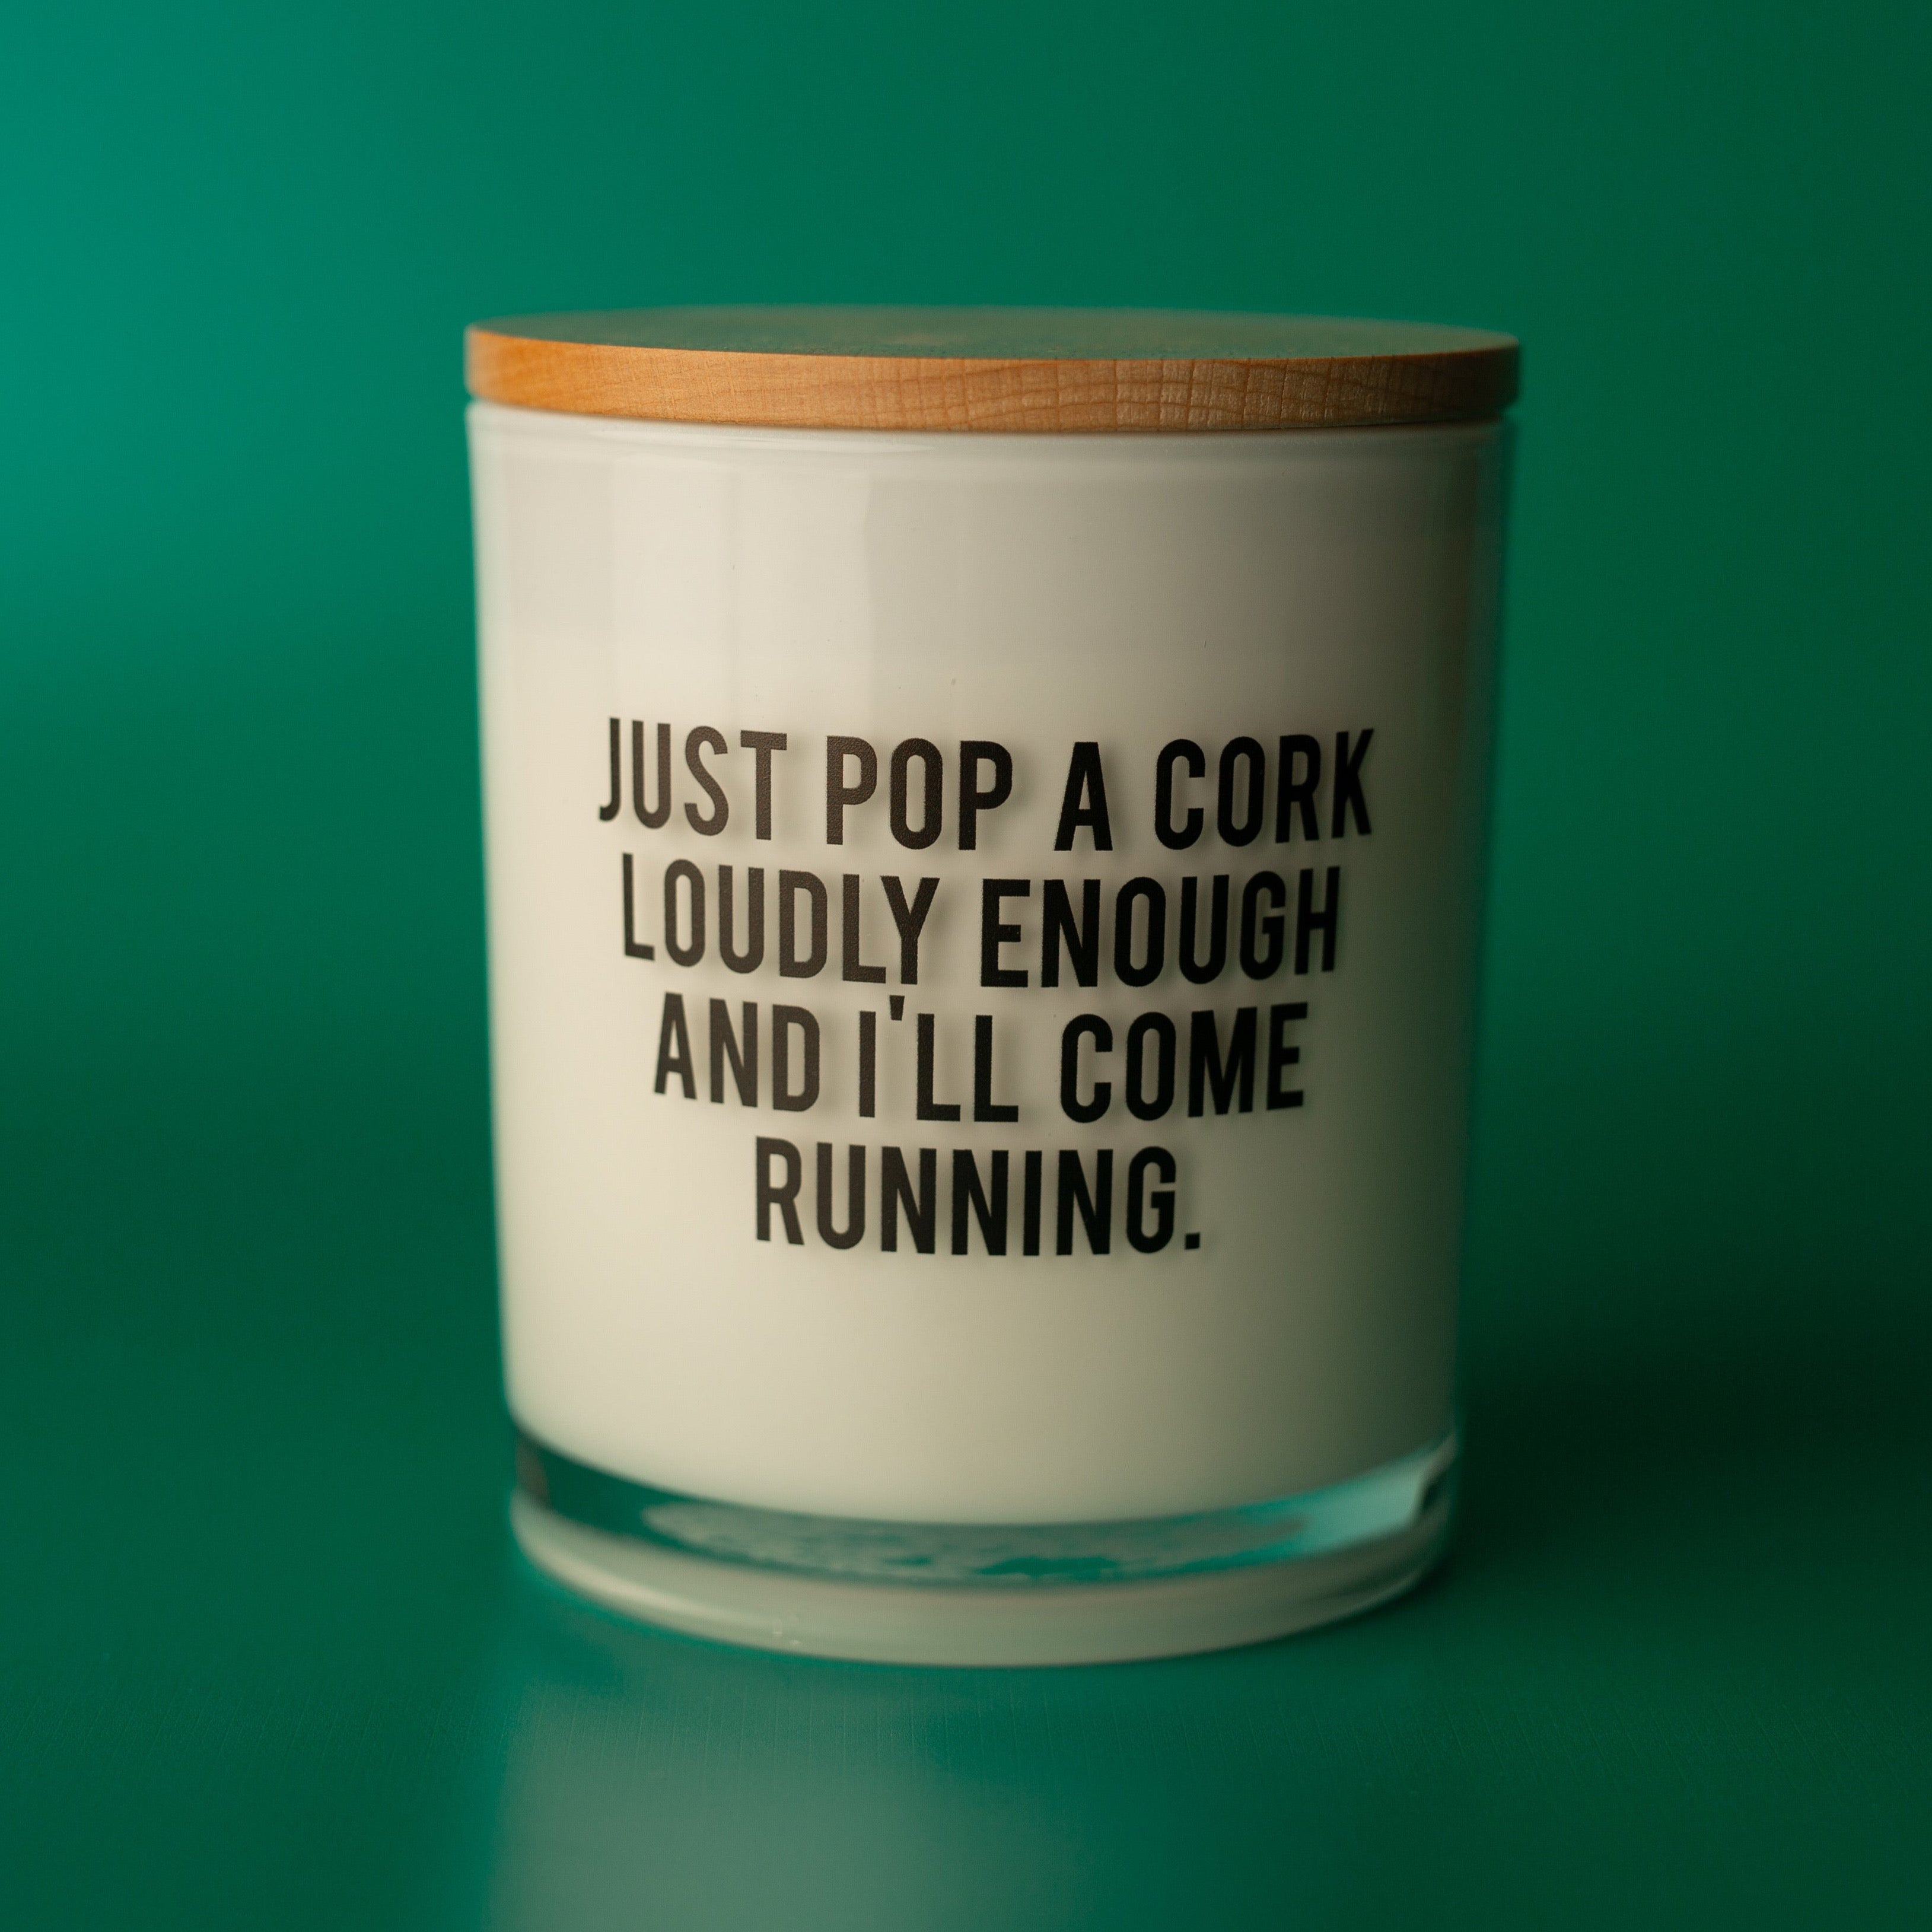 JUST%20POP%20A%20CORK%20LOUDLY%20ENOUGH%20CANDLE